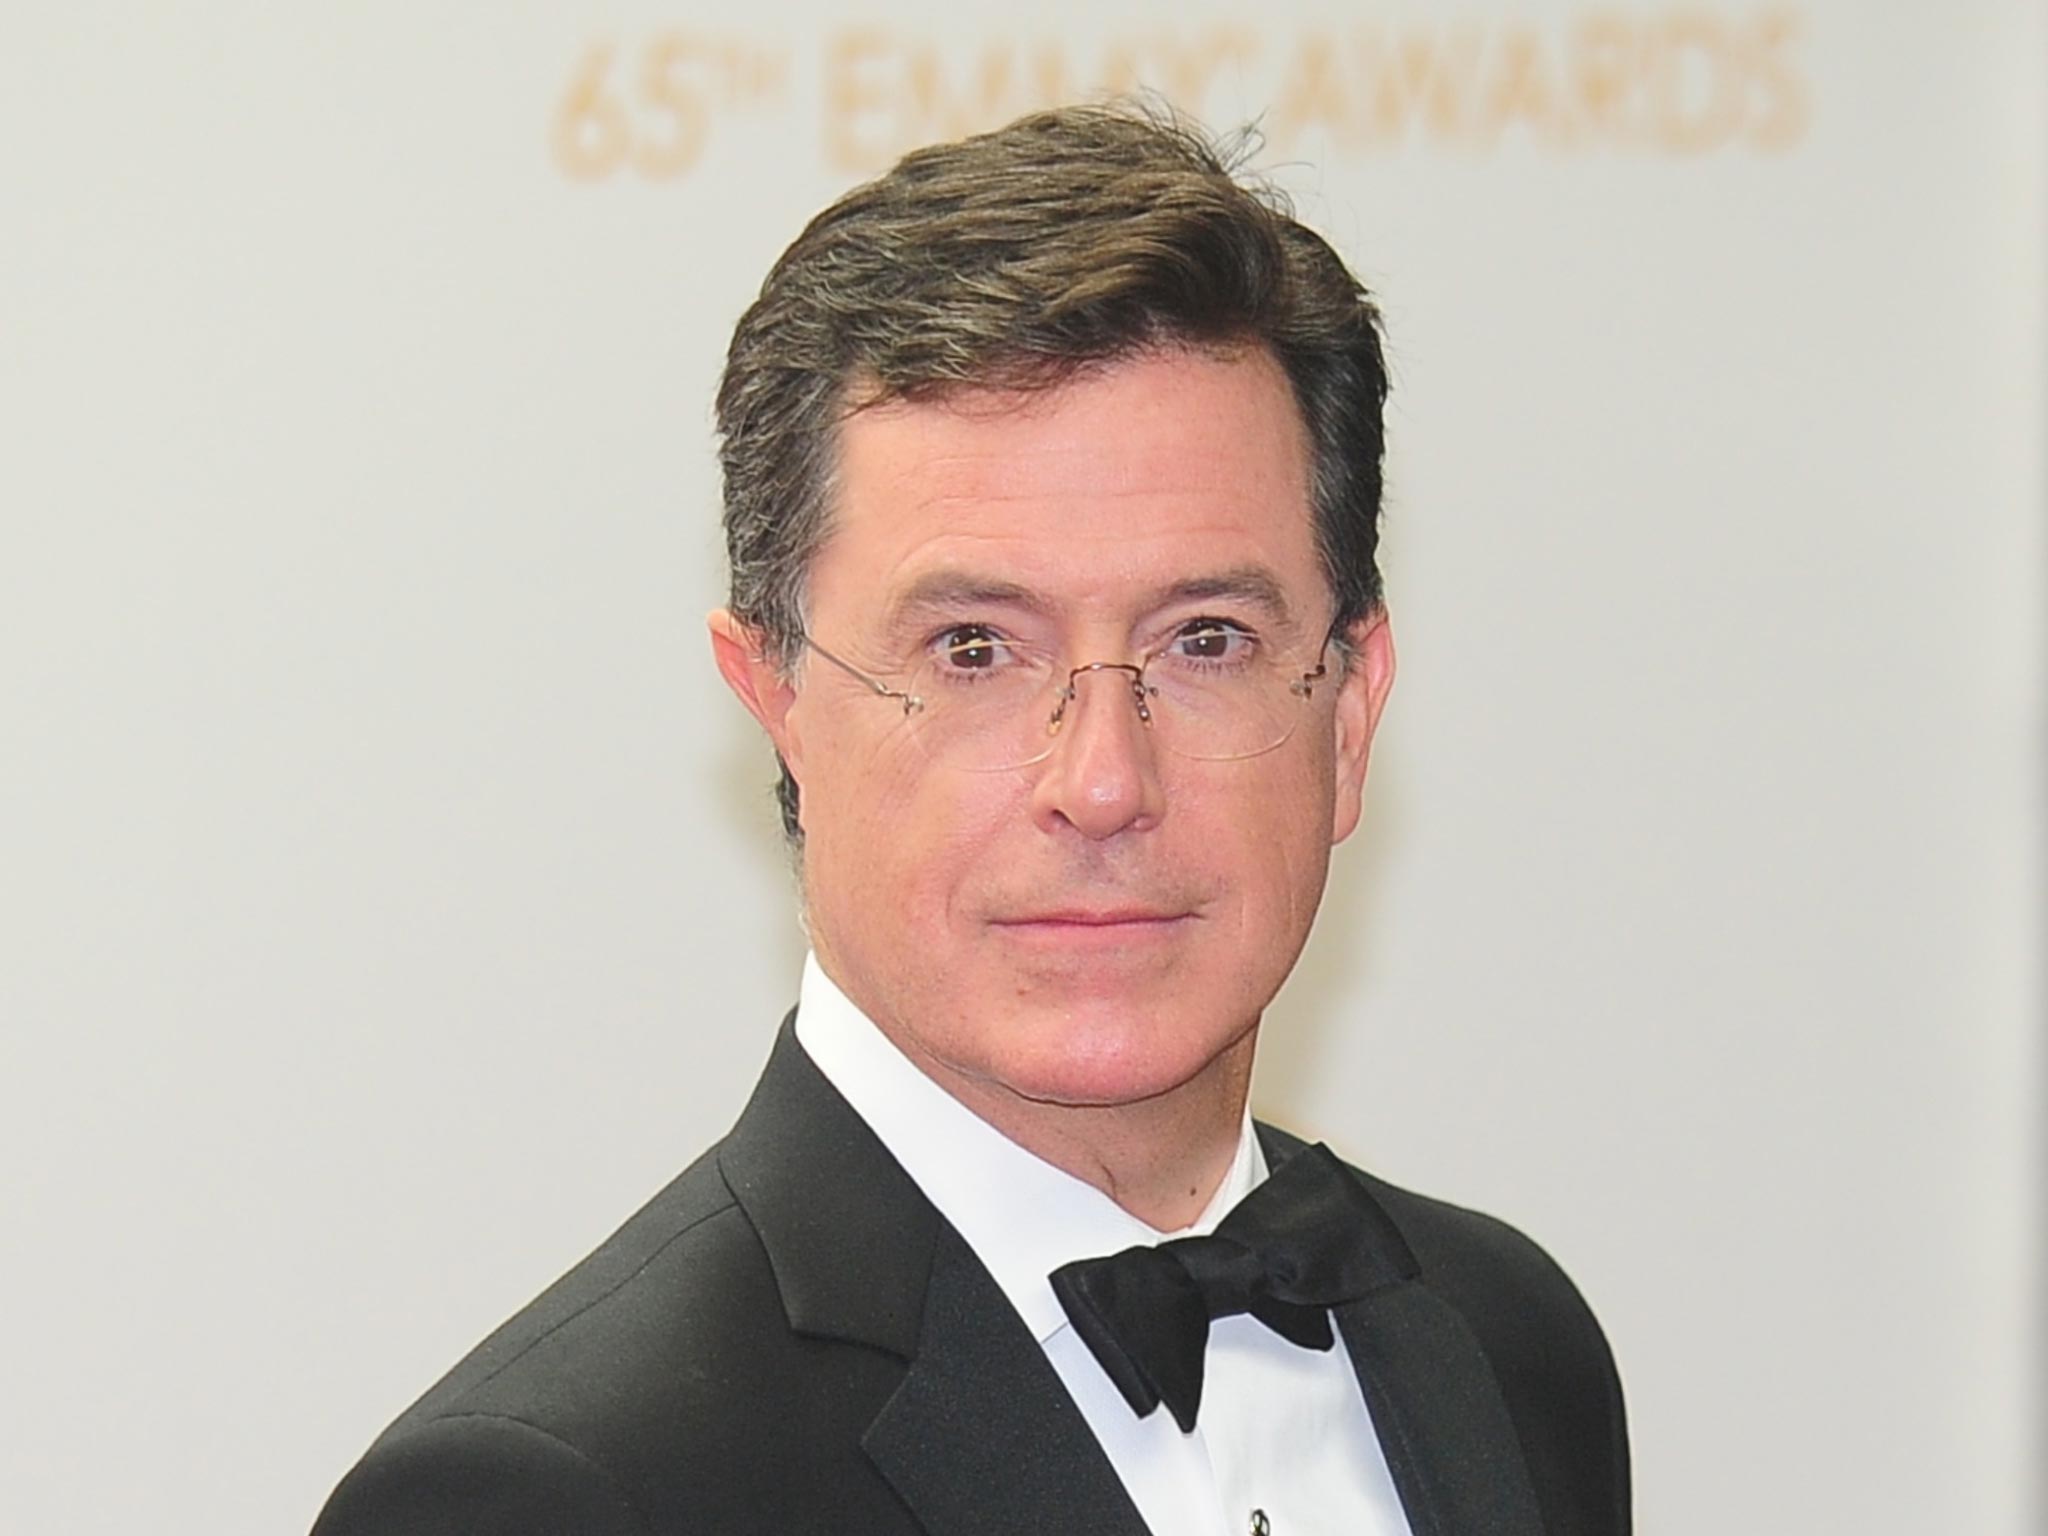 Satirist Stephen Colbert will be replacing David Letterman on The Late Show